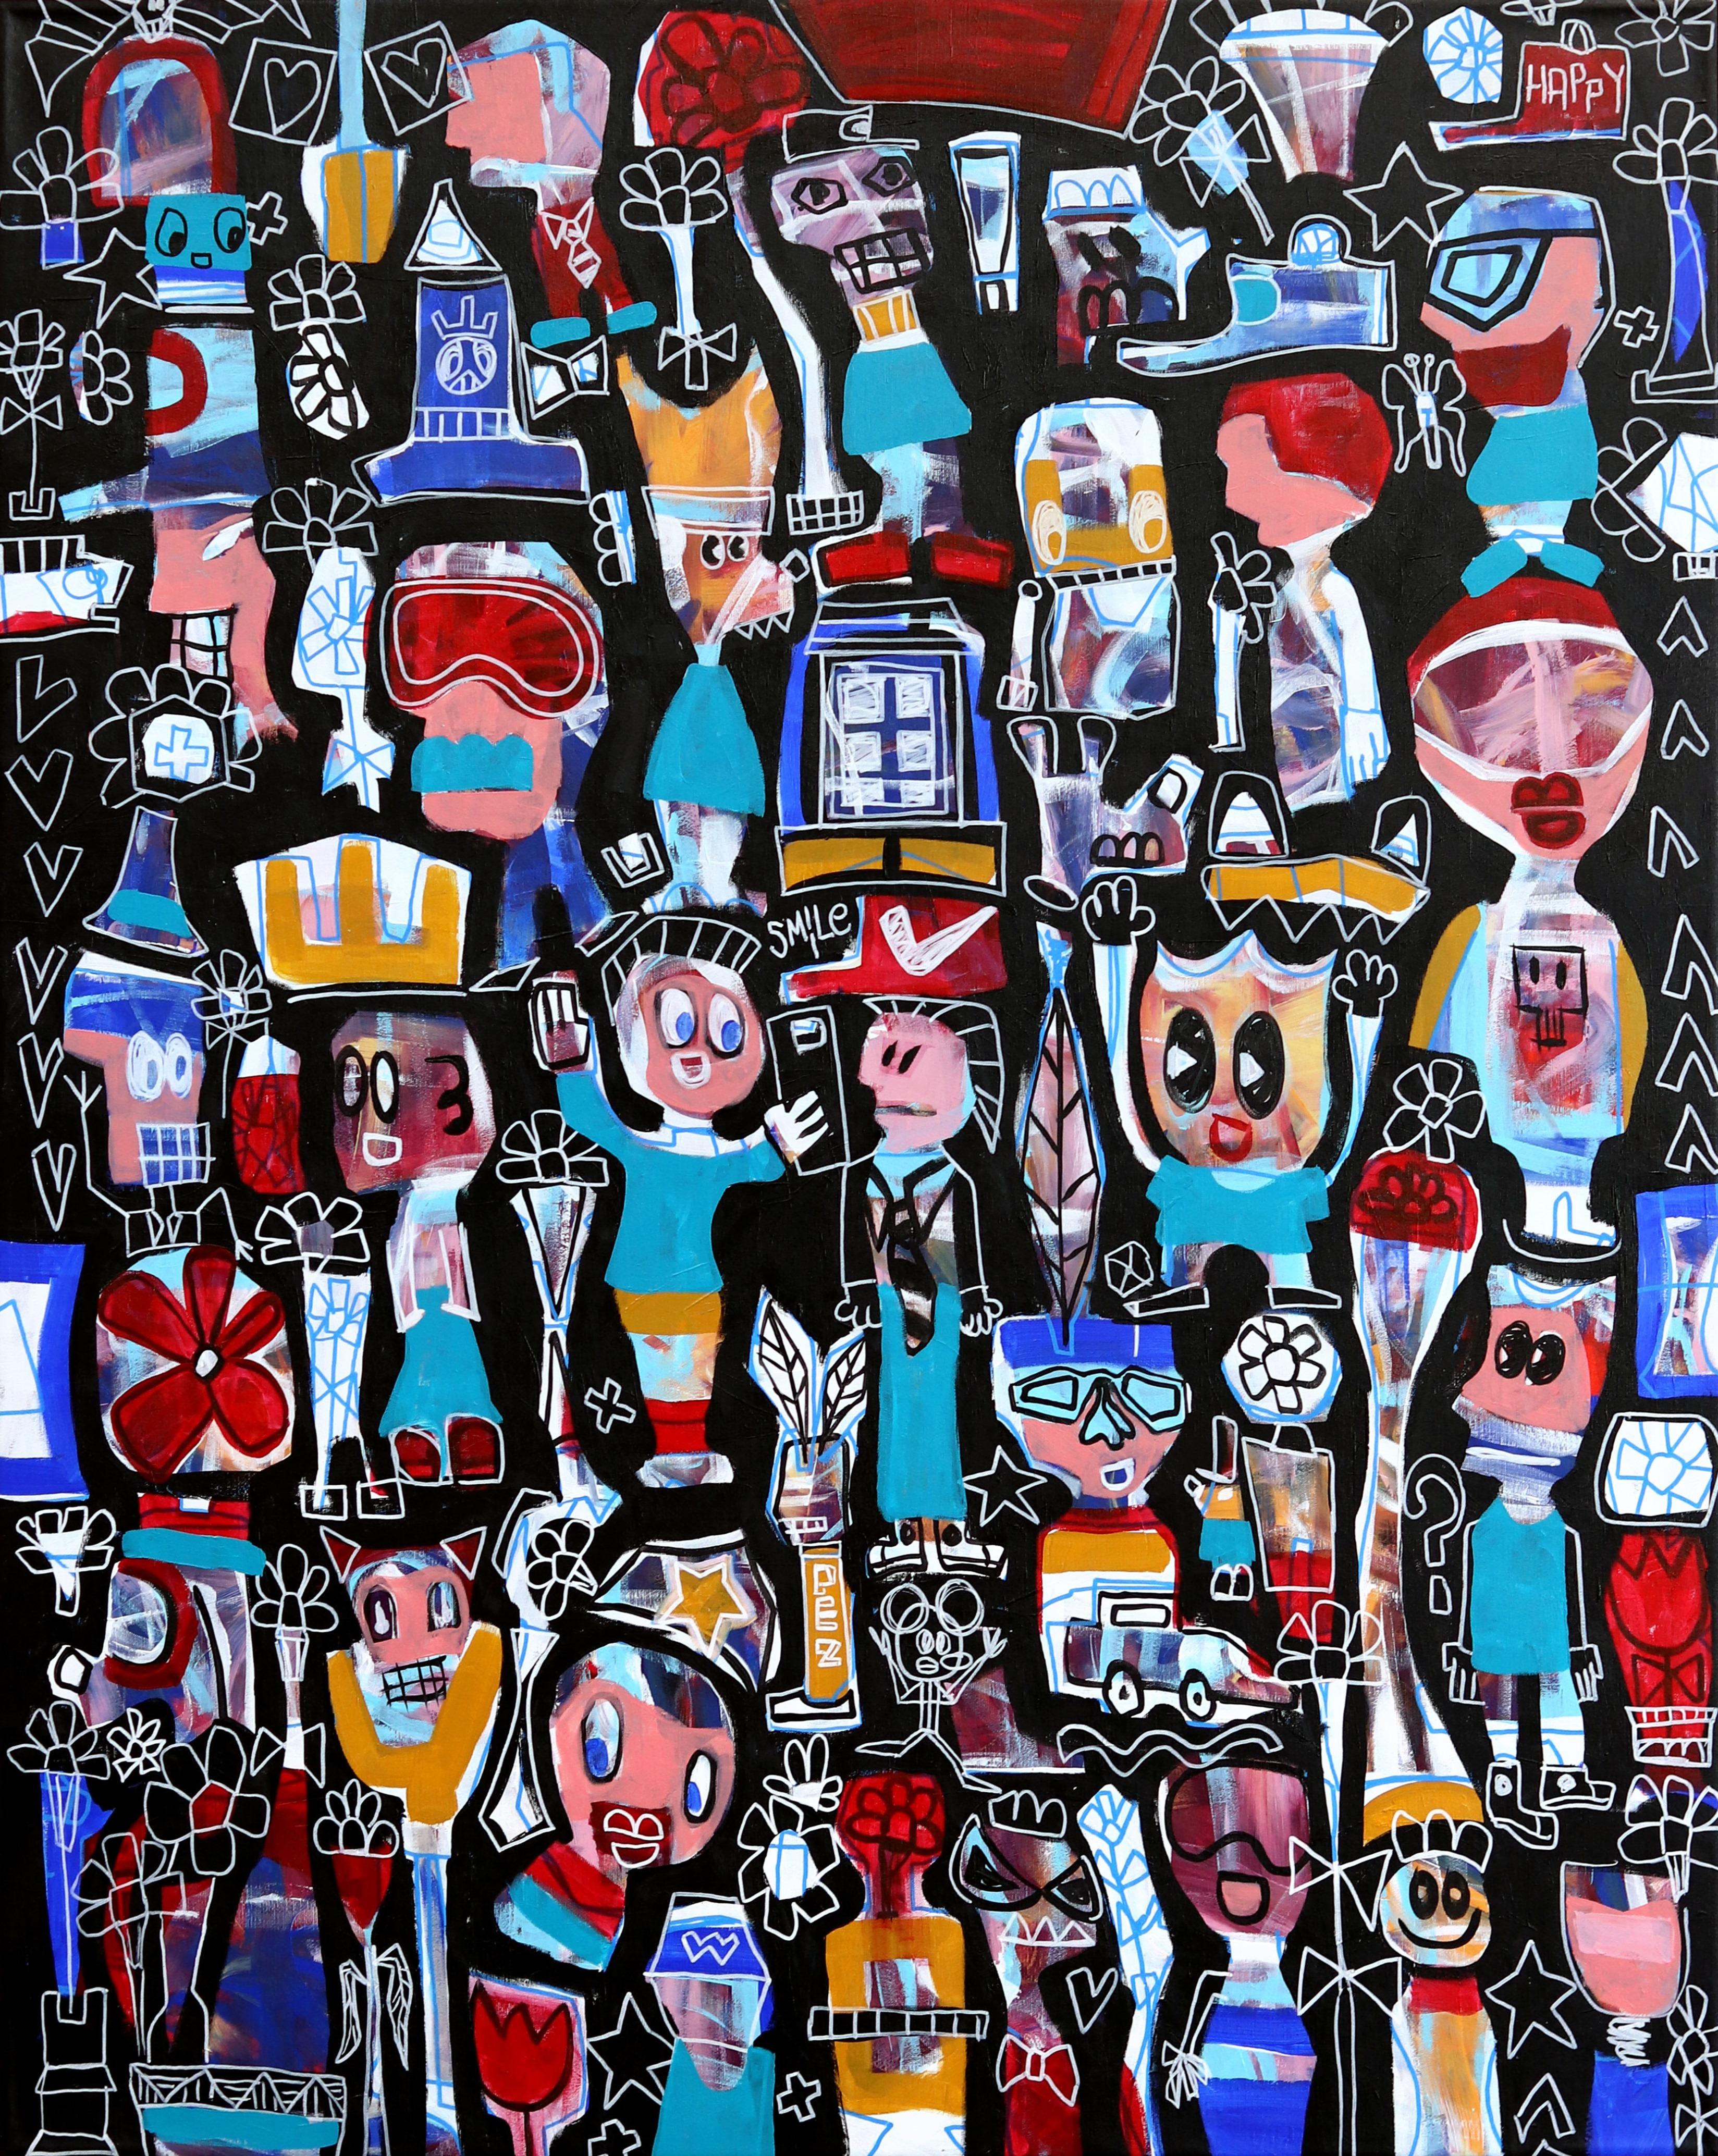 Up Up - Friends and Family Peinture néo-expressionniste grand format sur toile